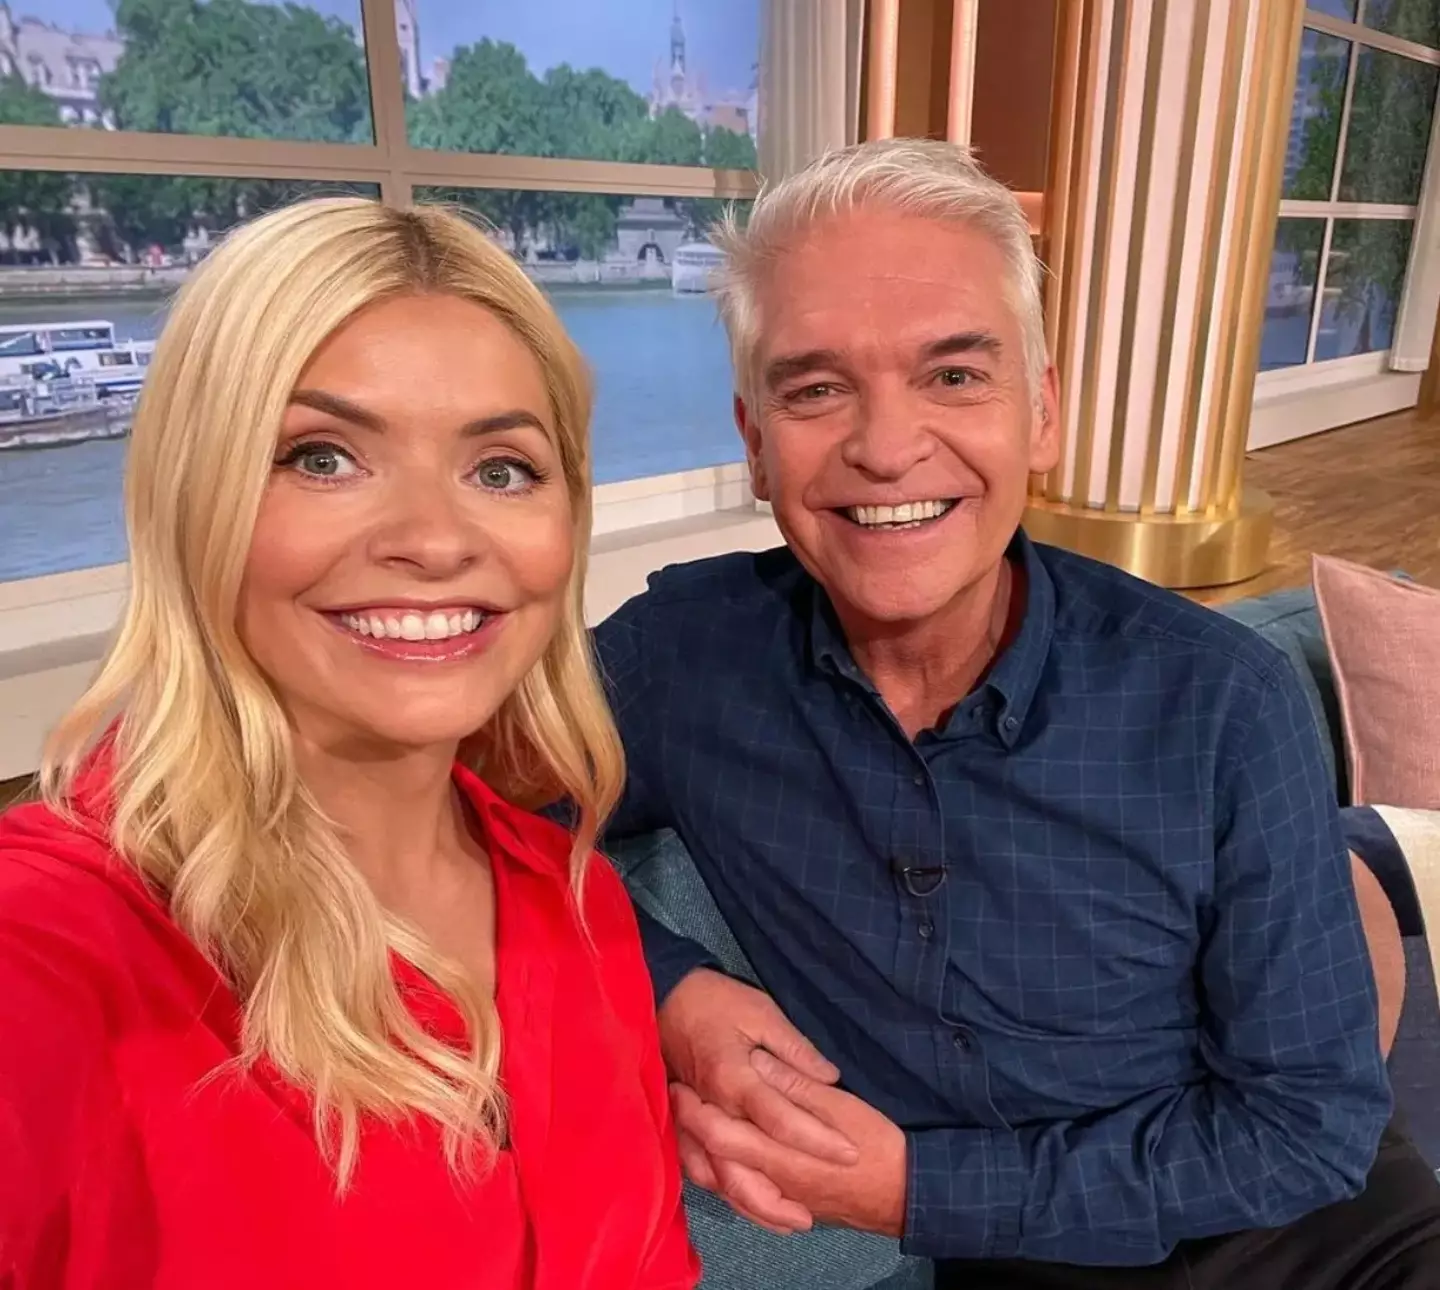 It has emerged that Phillip Schofield has now unfollowed Holly Willoughby off Instagram.